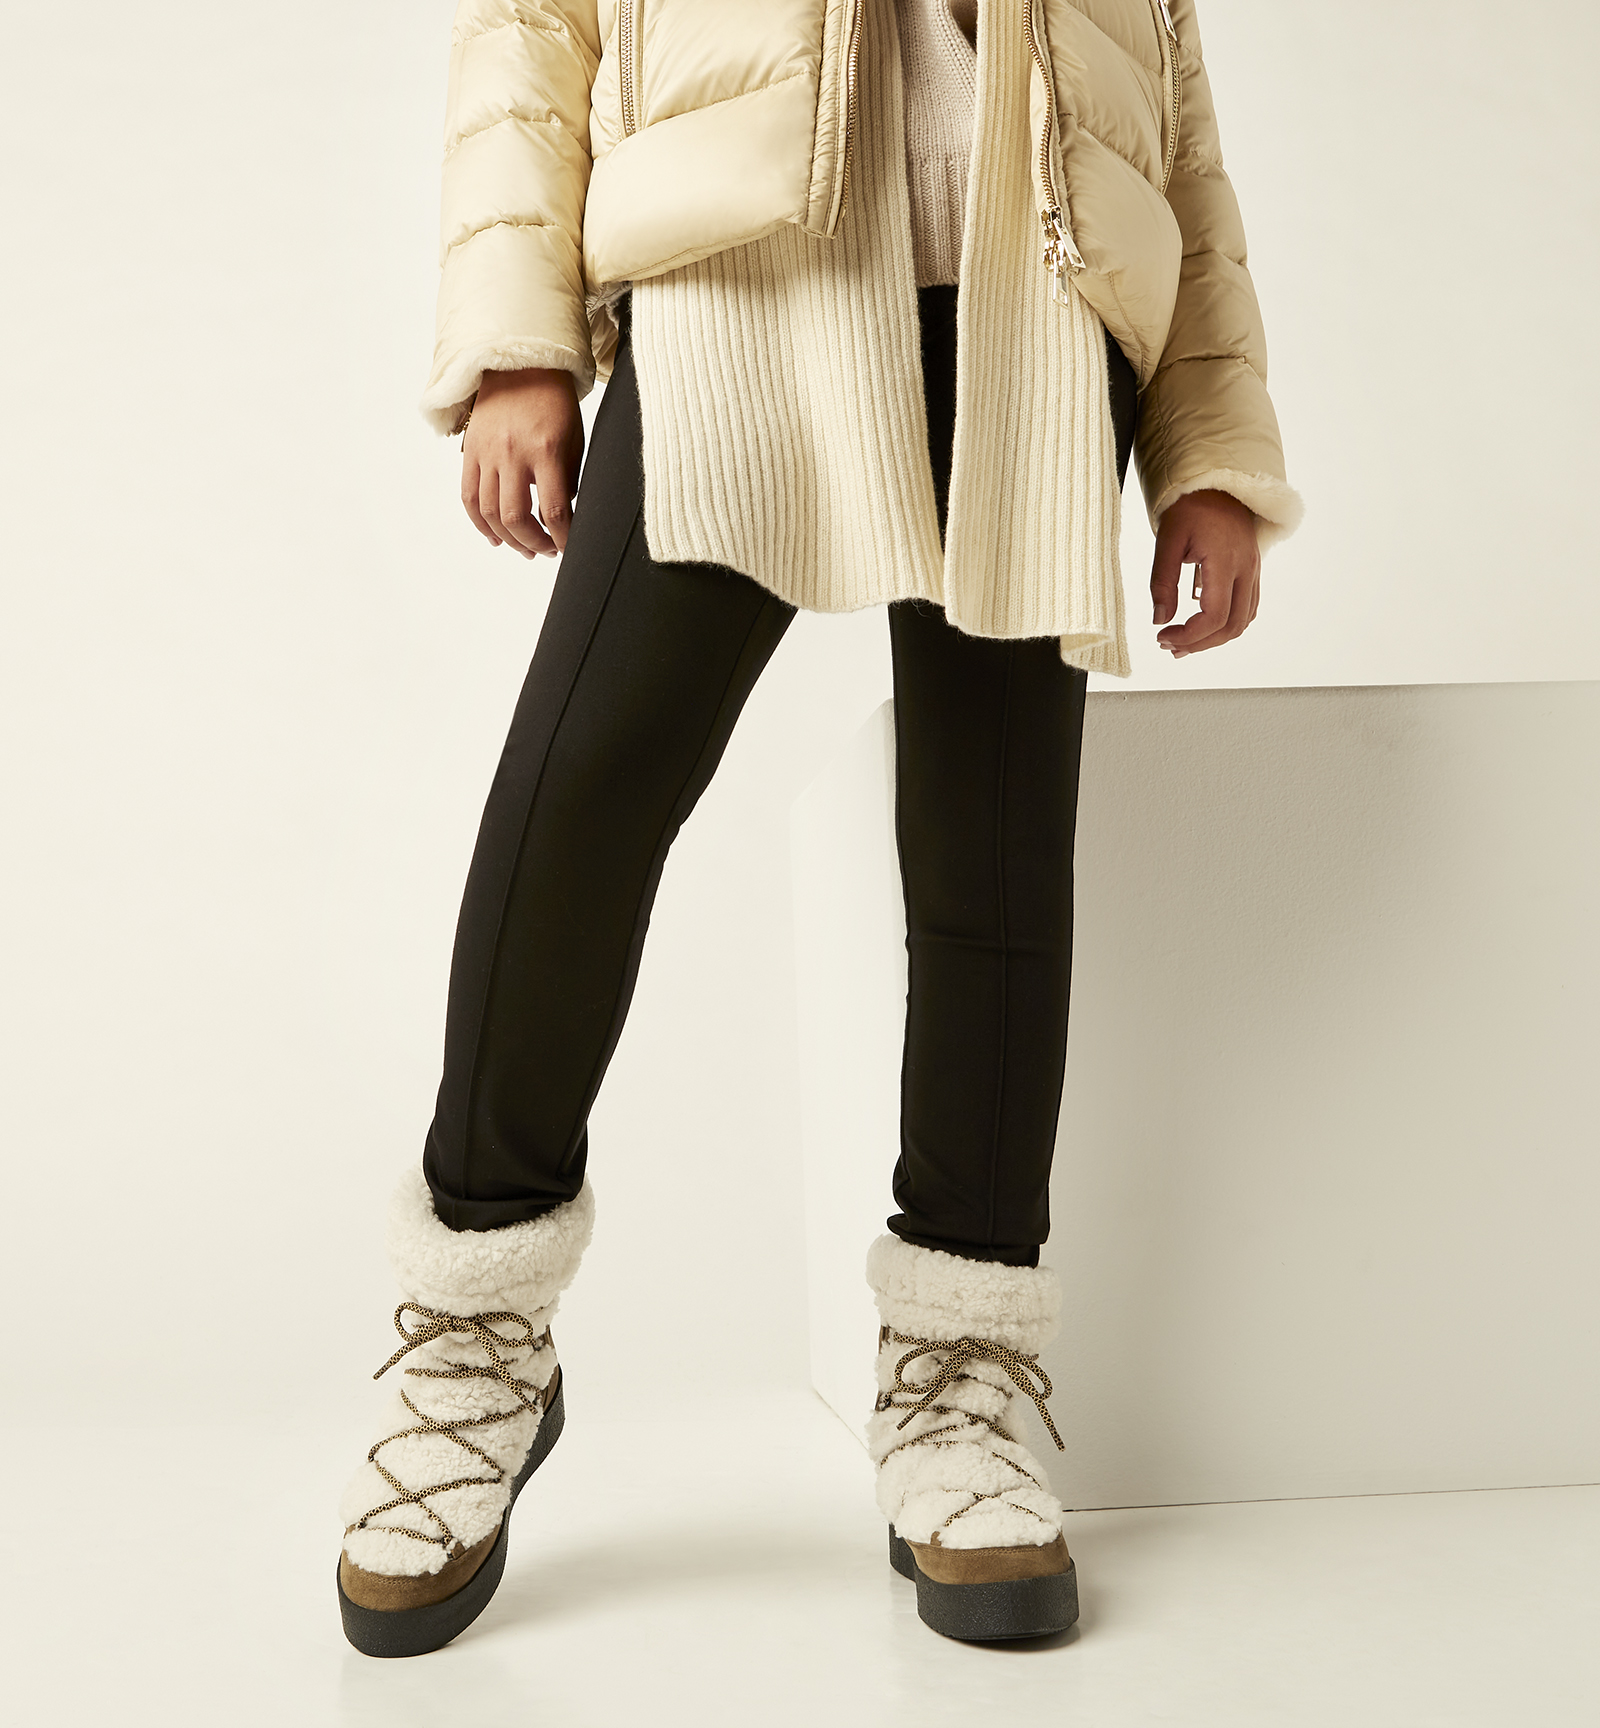 La Shearling - Dry™ City - Style | Canadienne